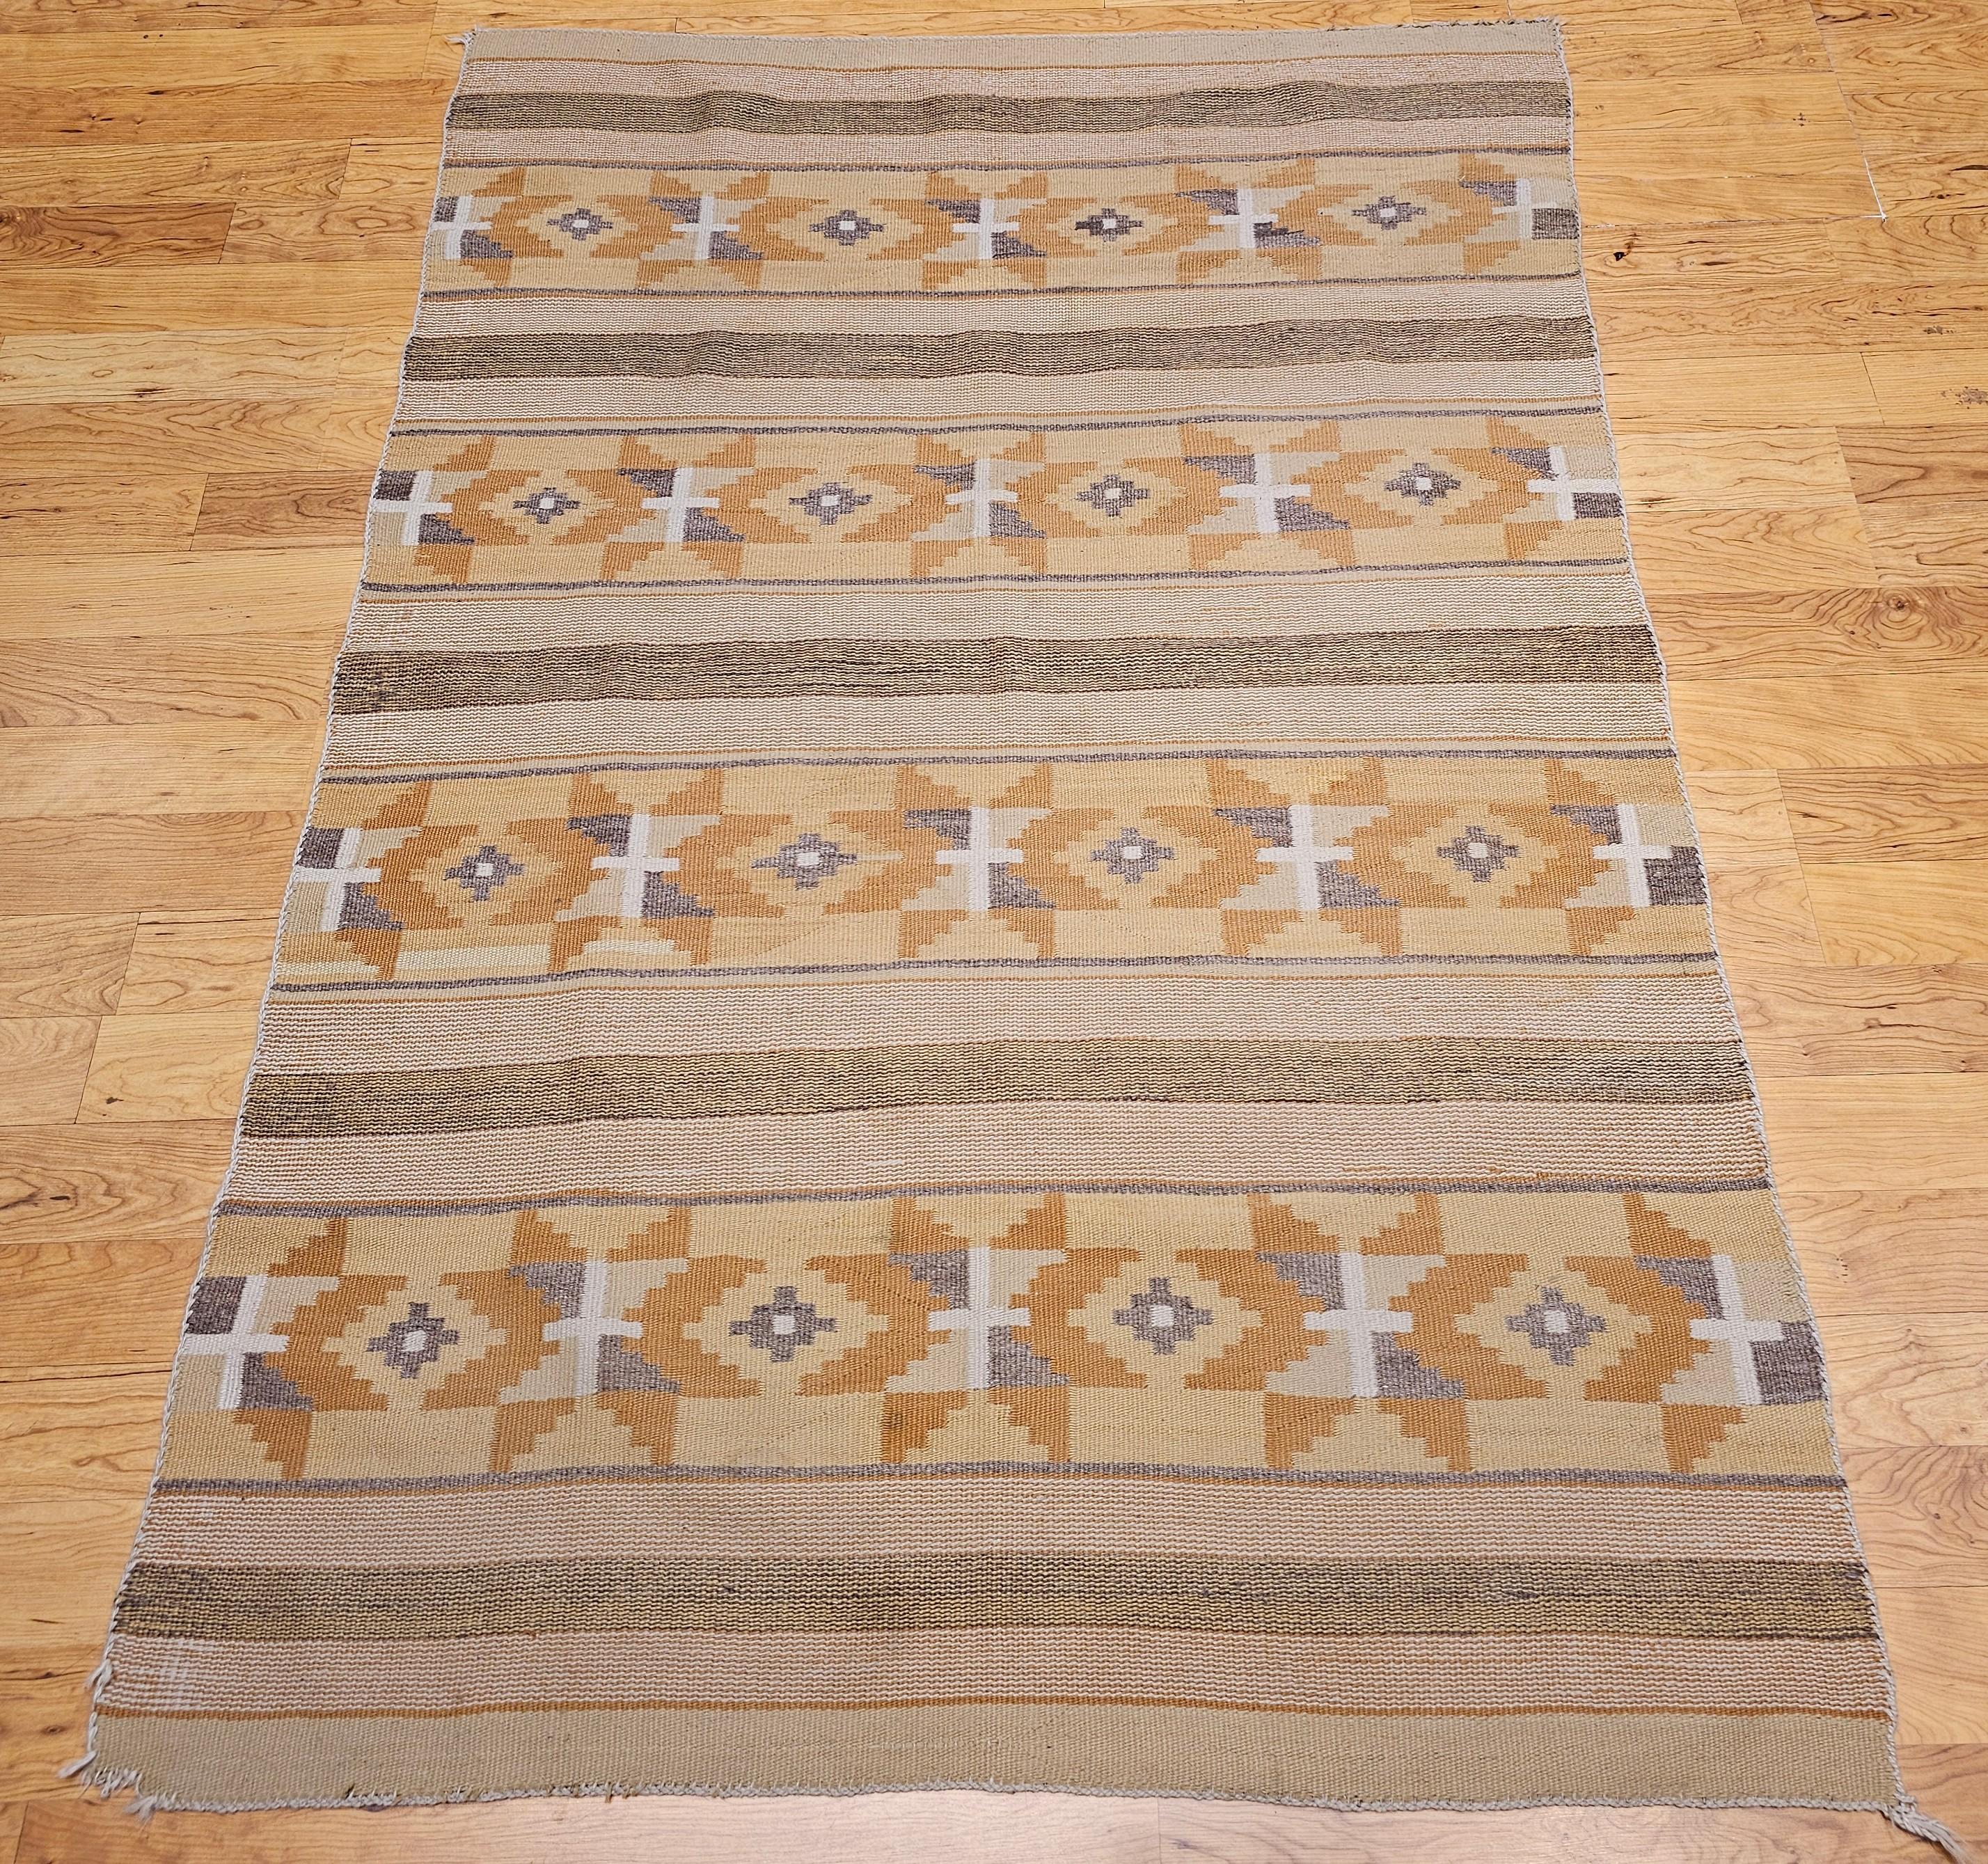 Finely hand-woven Native American Navajo Chinle rug in gold, yellow, ivory, brown, and gray colors from the SW United States from the early 1900s.   The Chinle rug is in the banded stripe pattern with small geometric medallions in each row. The